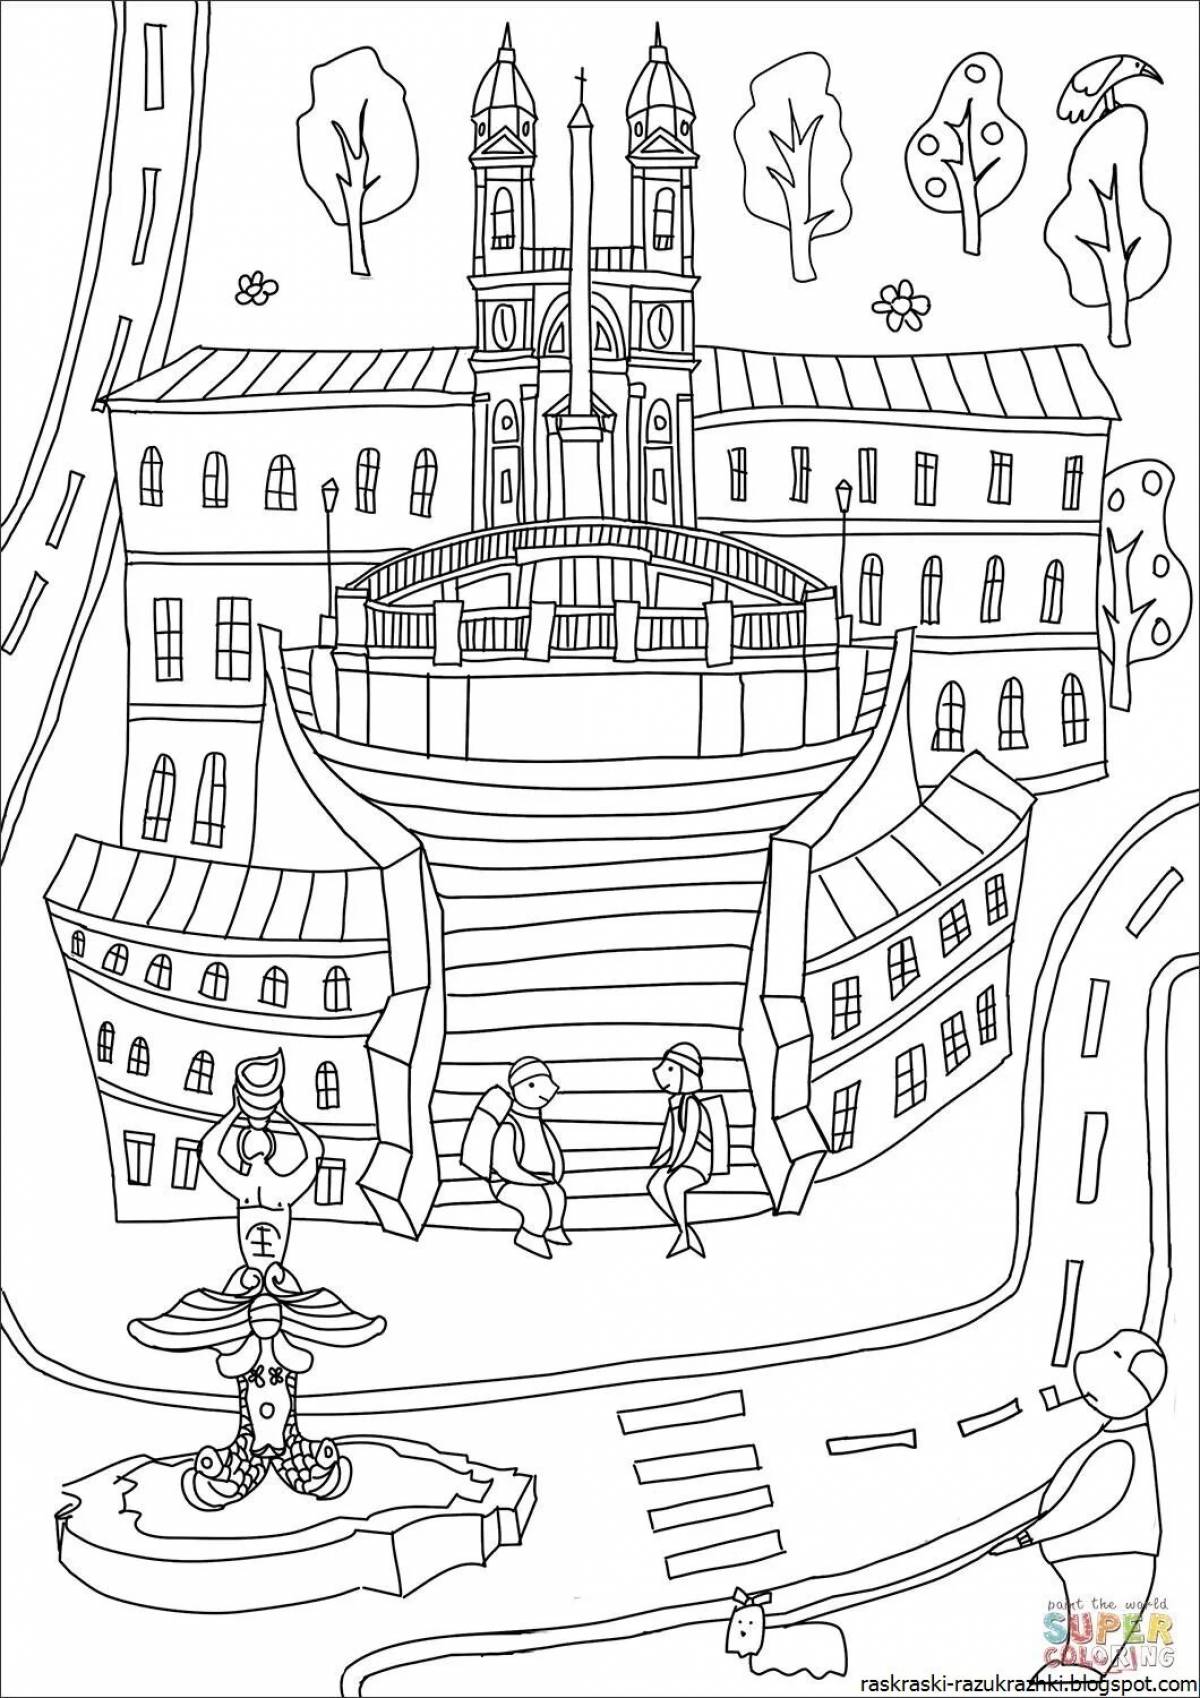 Coloring page st. petersburg obsessed with flowers for children 5-6 years old